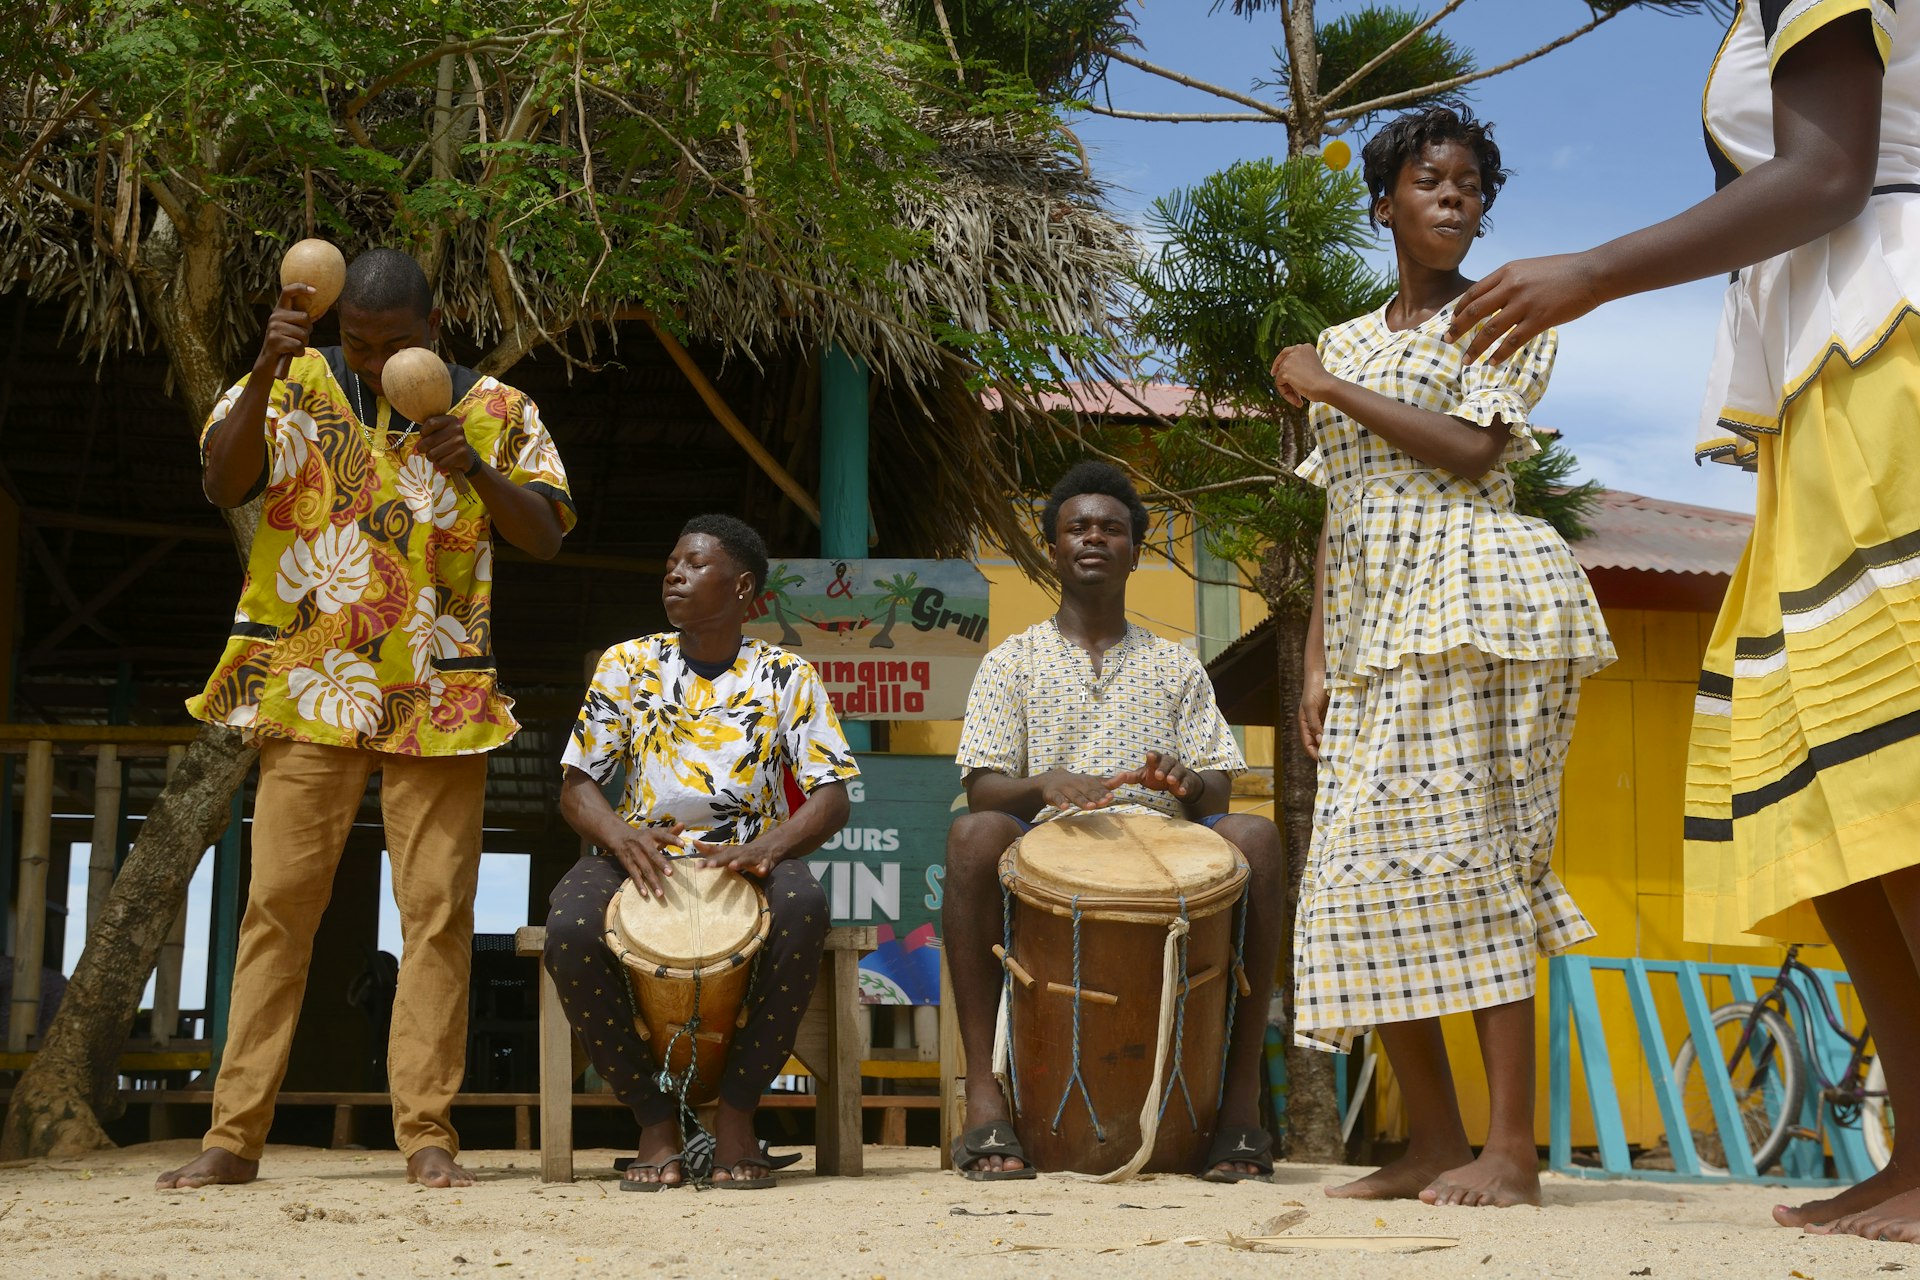 Garifuna troupe performs traditional songs with drumming and dancing in Hopkins Village.